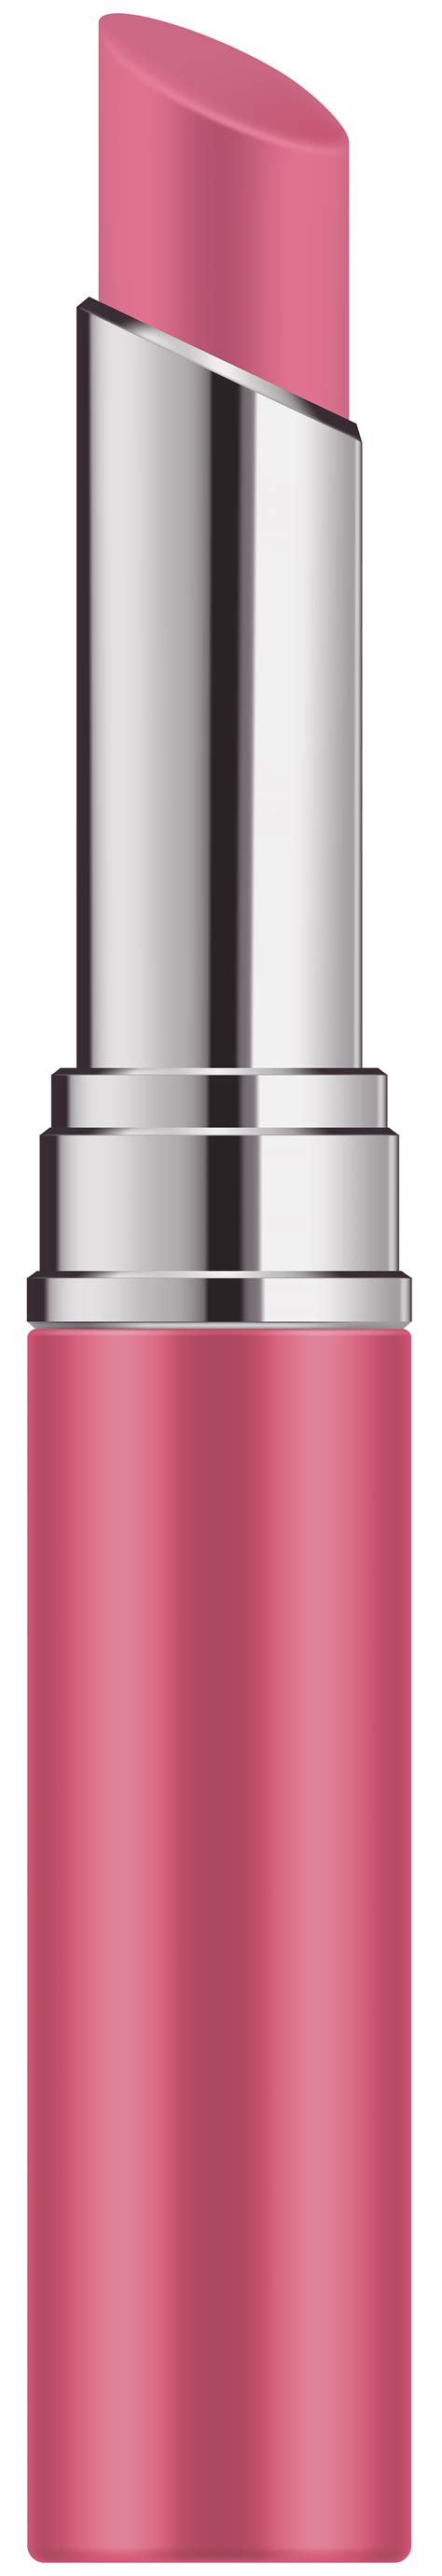 Pink Lipstick Clip Art Png Image Gallery Yopriceville High Quality